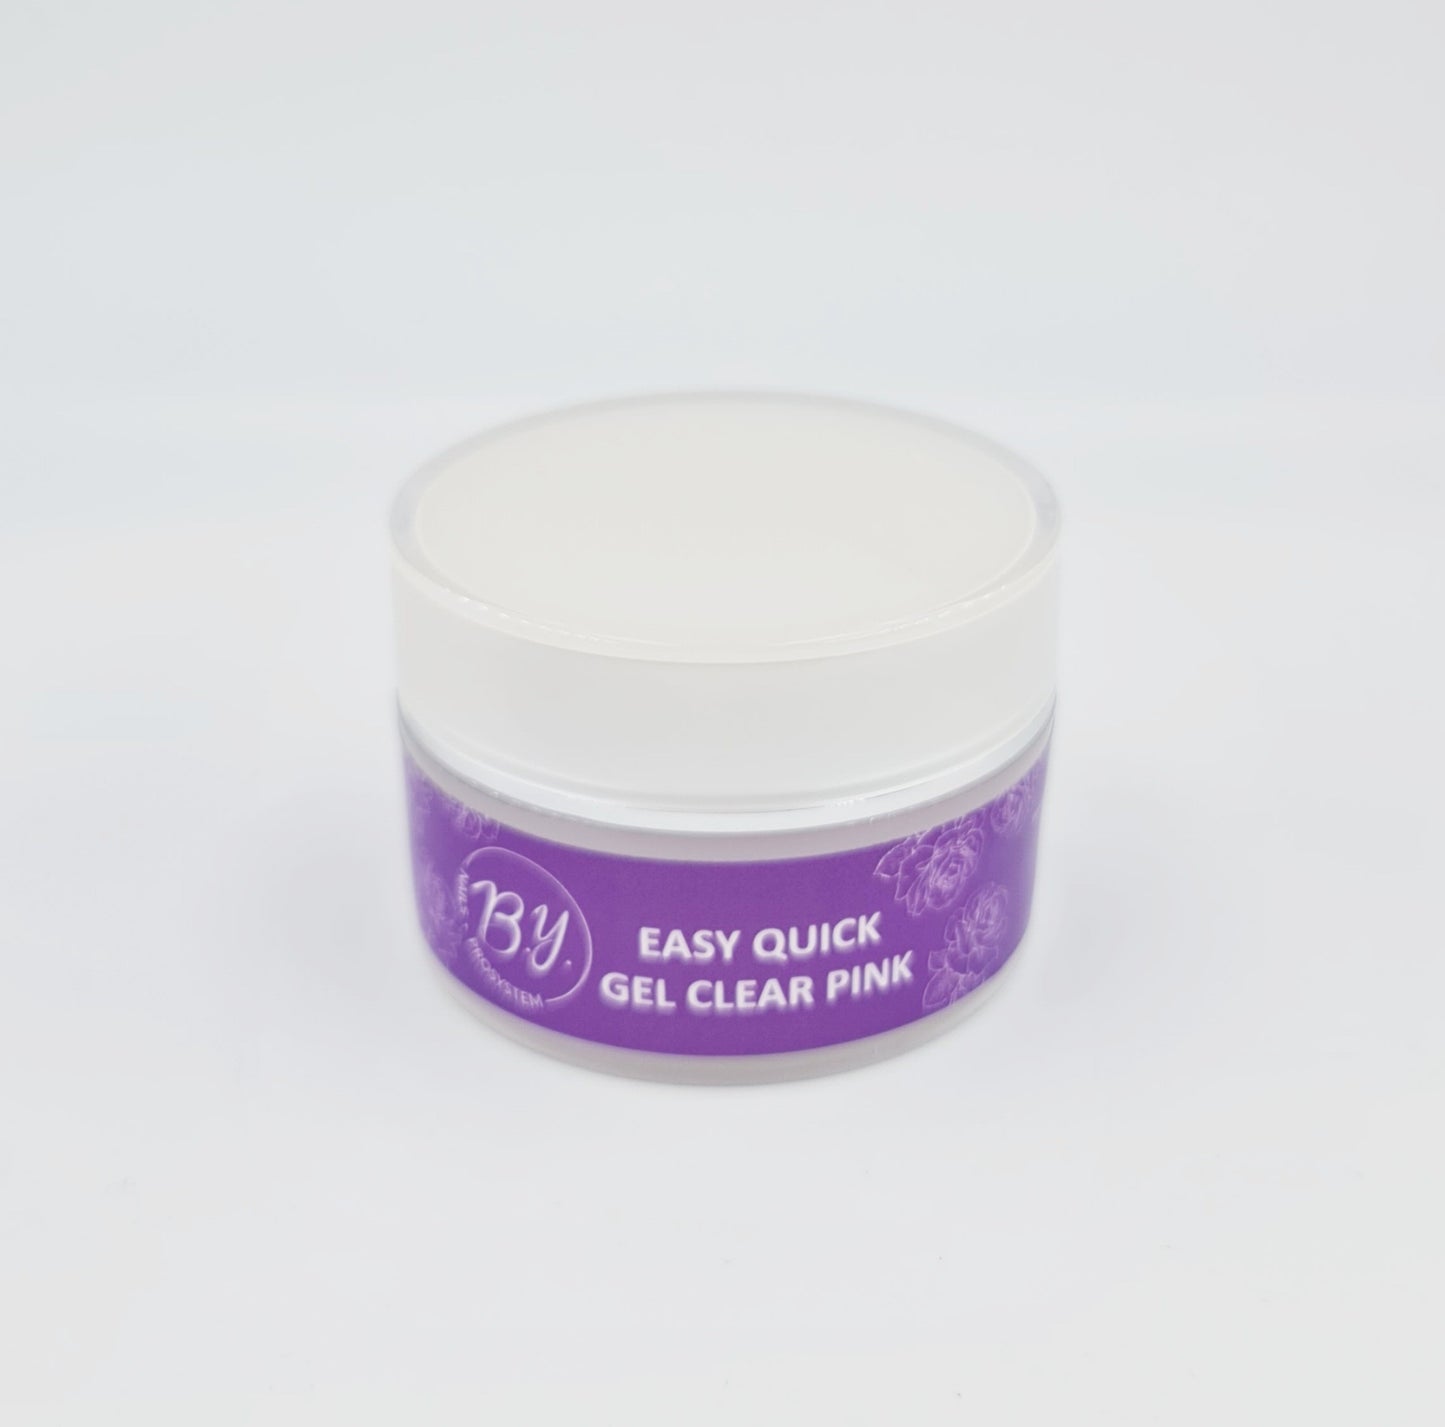 EASY QUICK GEL CLEAR PINK - BY ProSystem